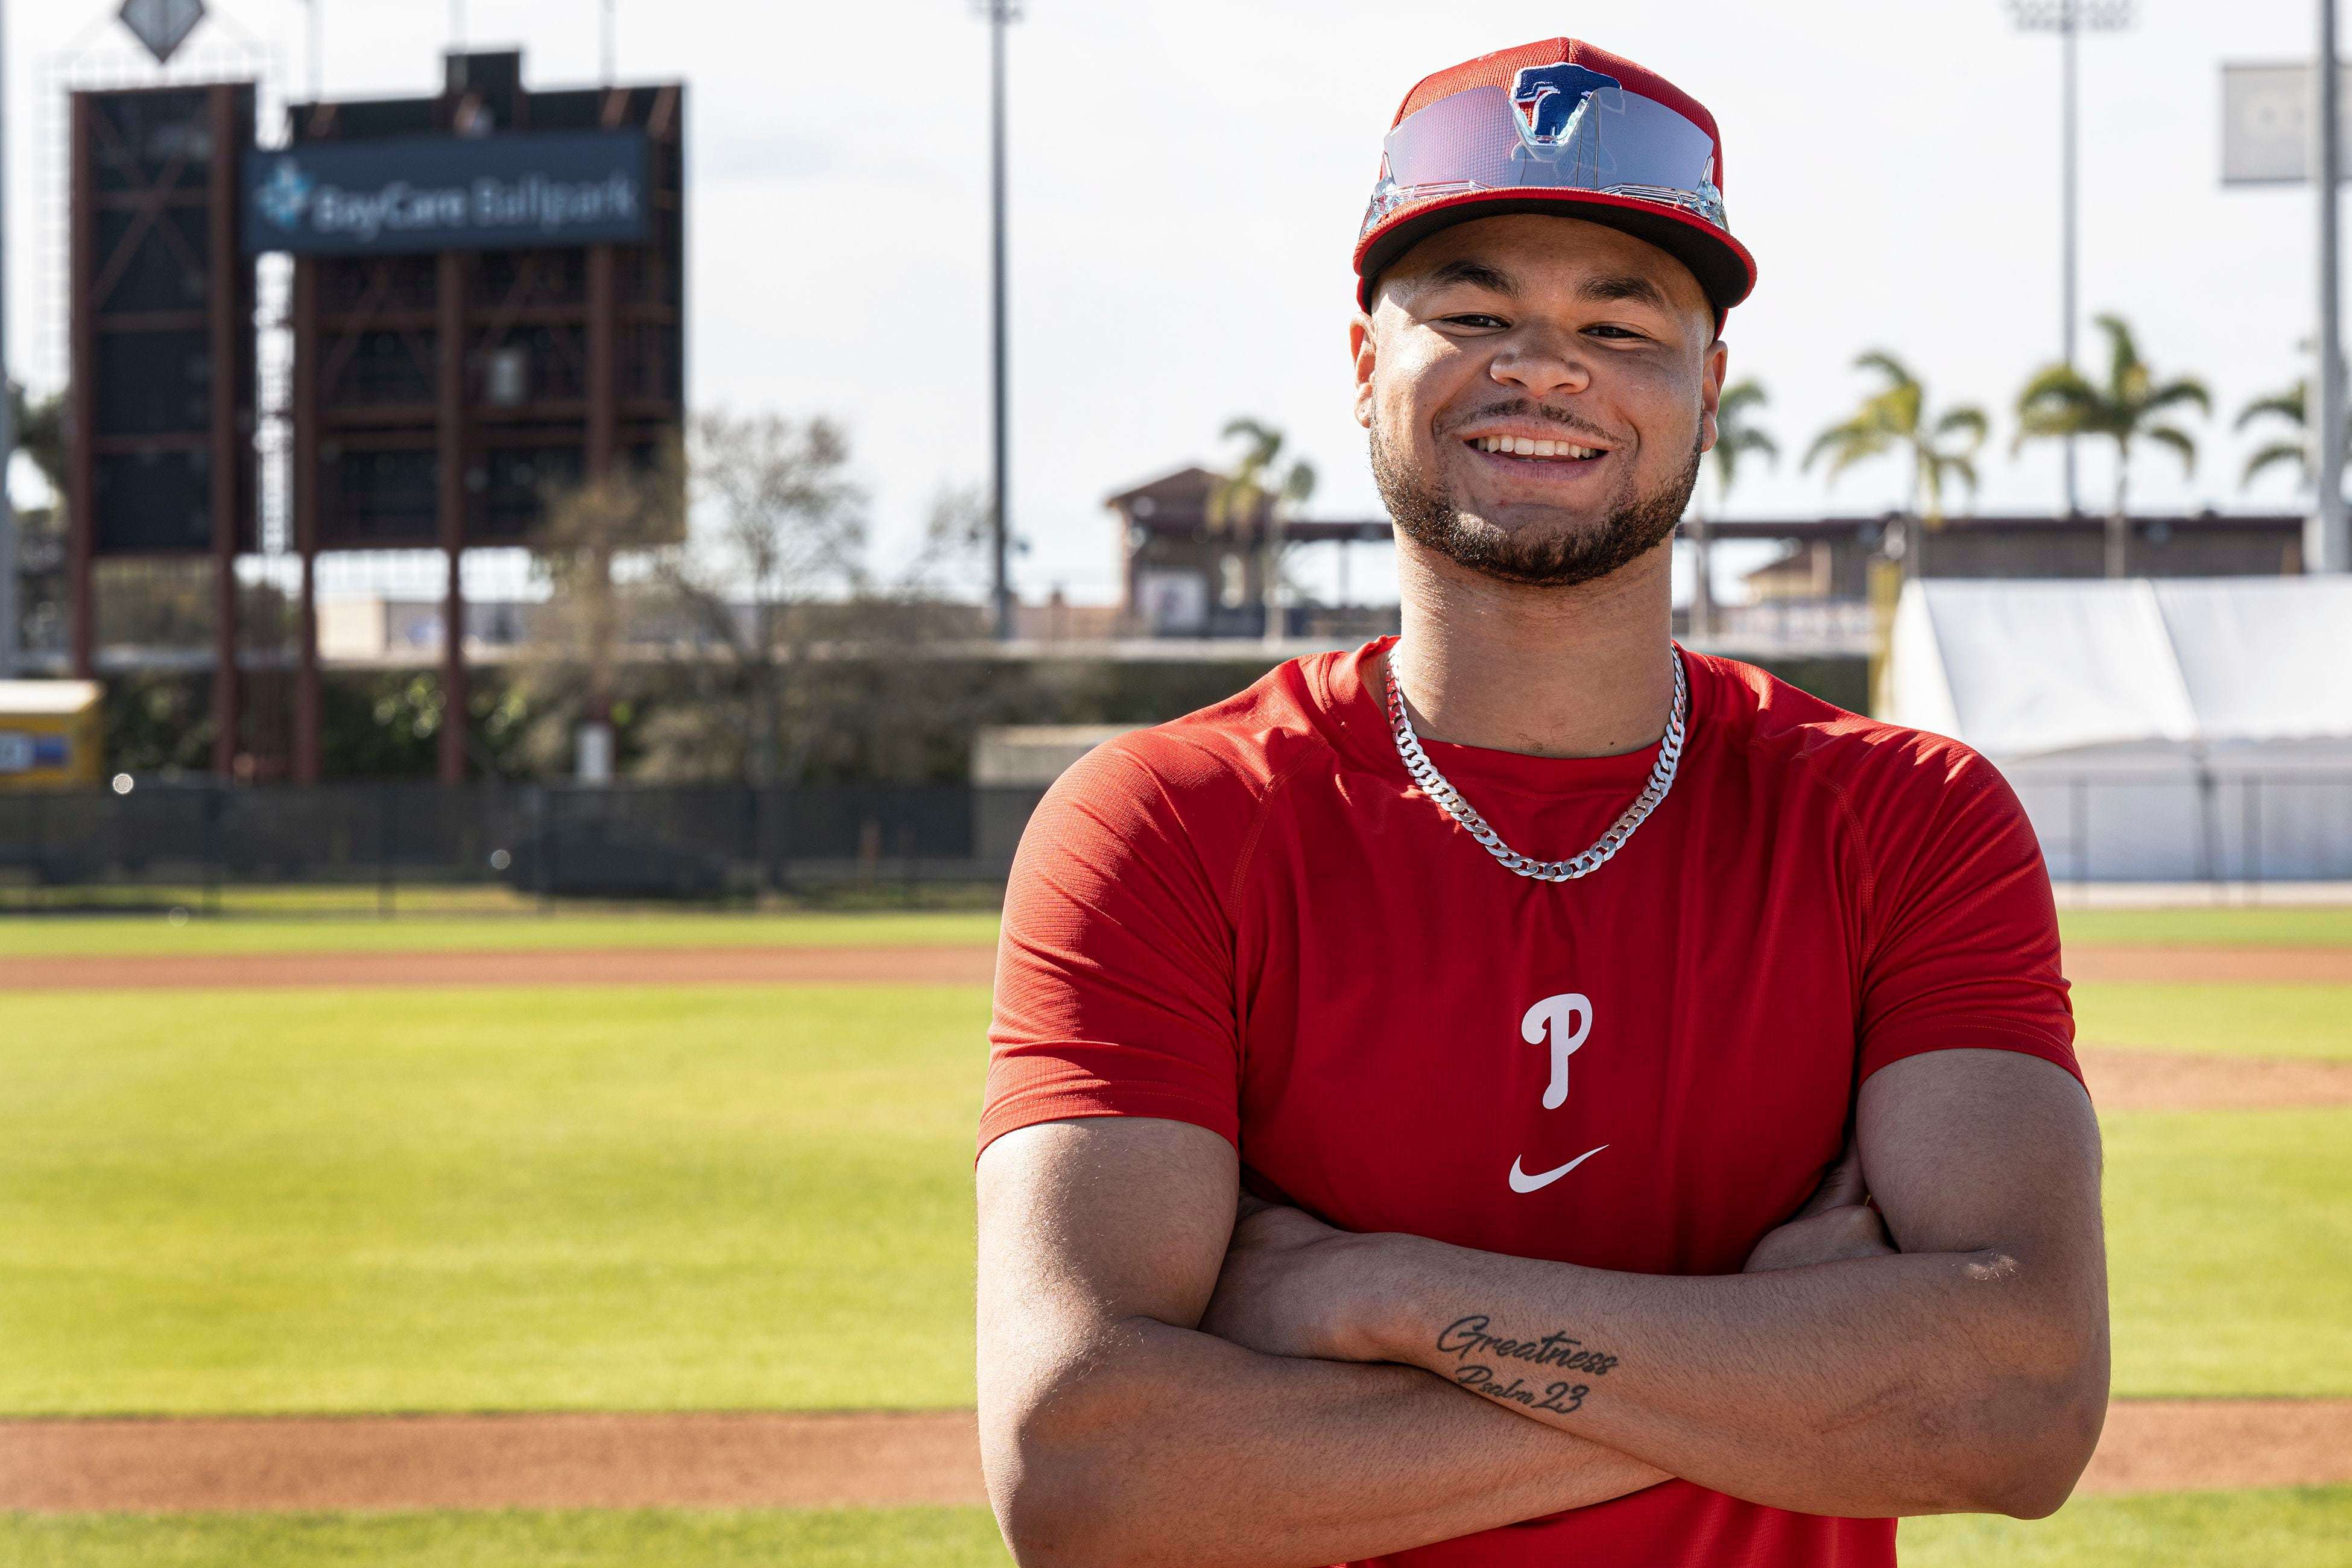 phillies prospect justin crawford is doing his part to make the show, with a helping hand from bryson stott